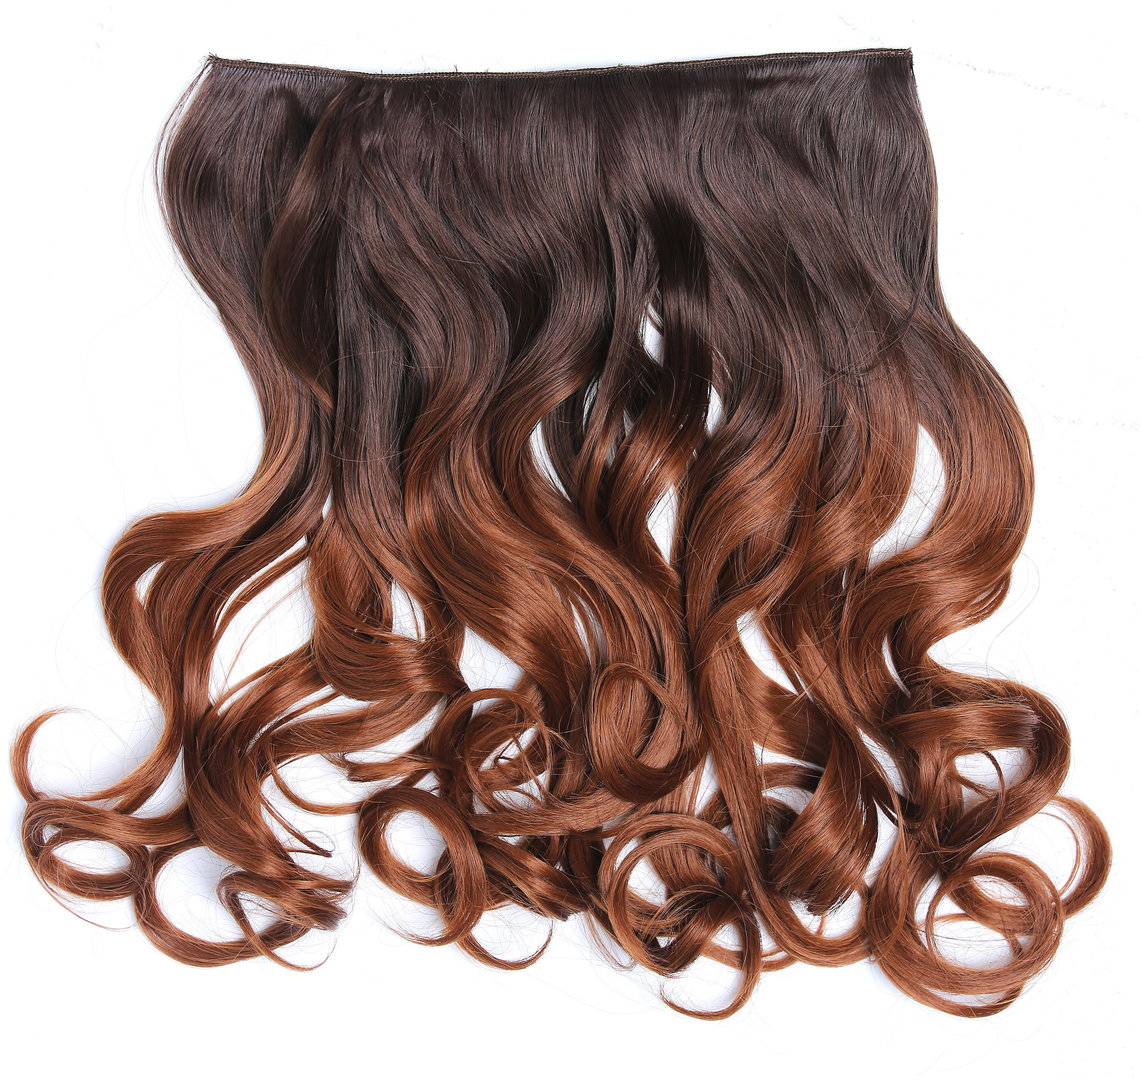 WIG ME UP - CMT-863-052TT30 Clip-in hair extension 5 clips wide full back  of the head curled wavy ombre chestnut mix of brown and copper brown 15  inches